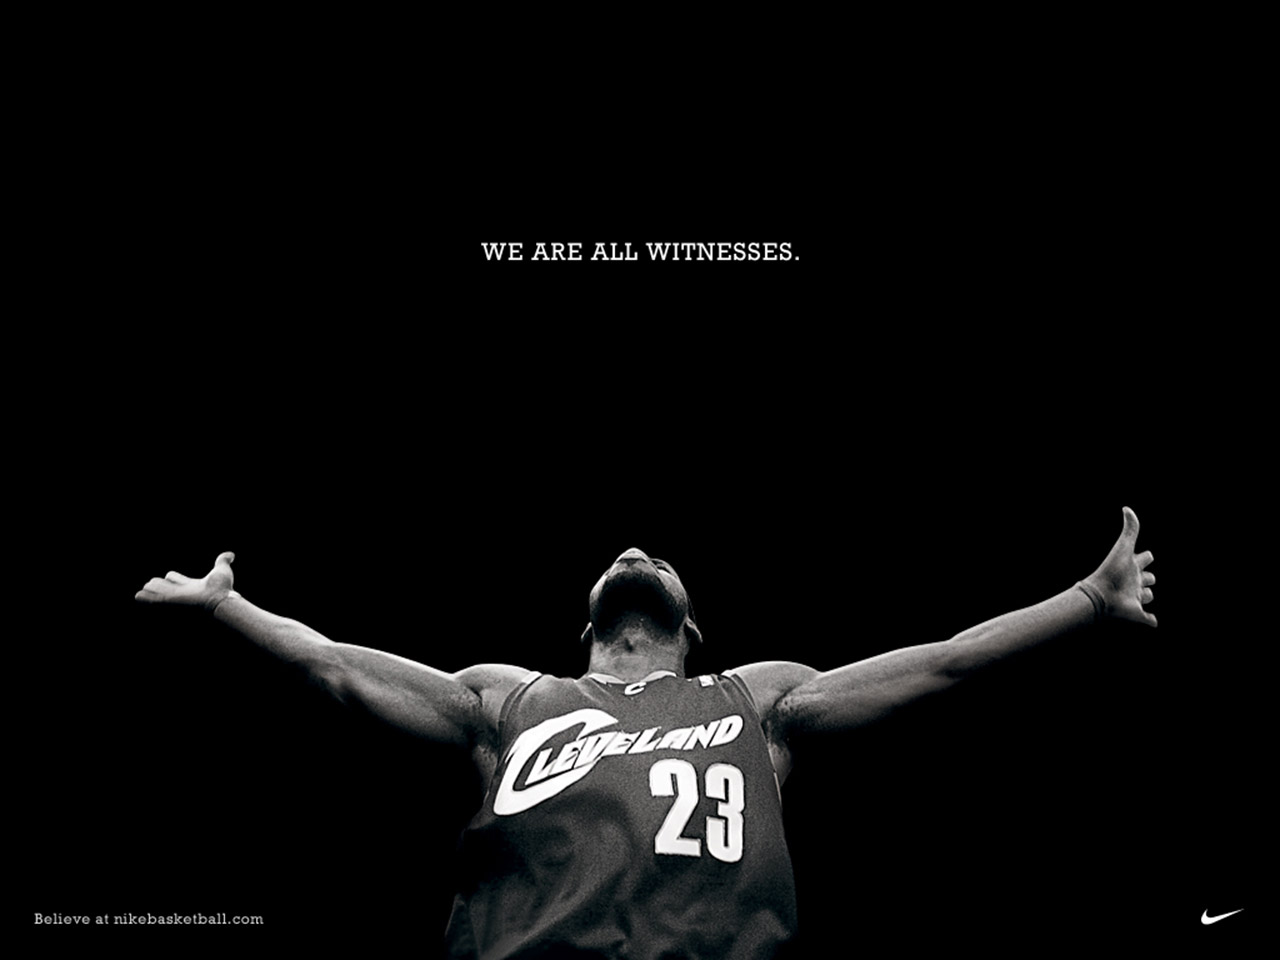 LeBron James Witness Wallpaper. That would be all regarding new categories